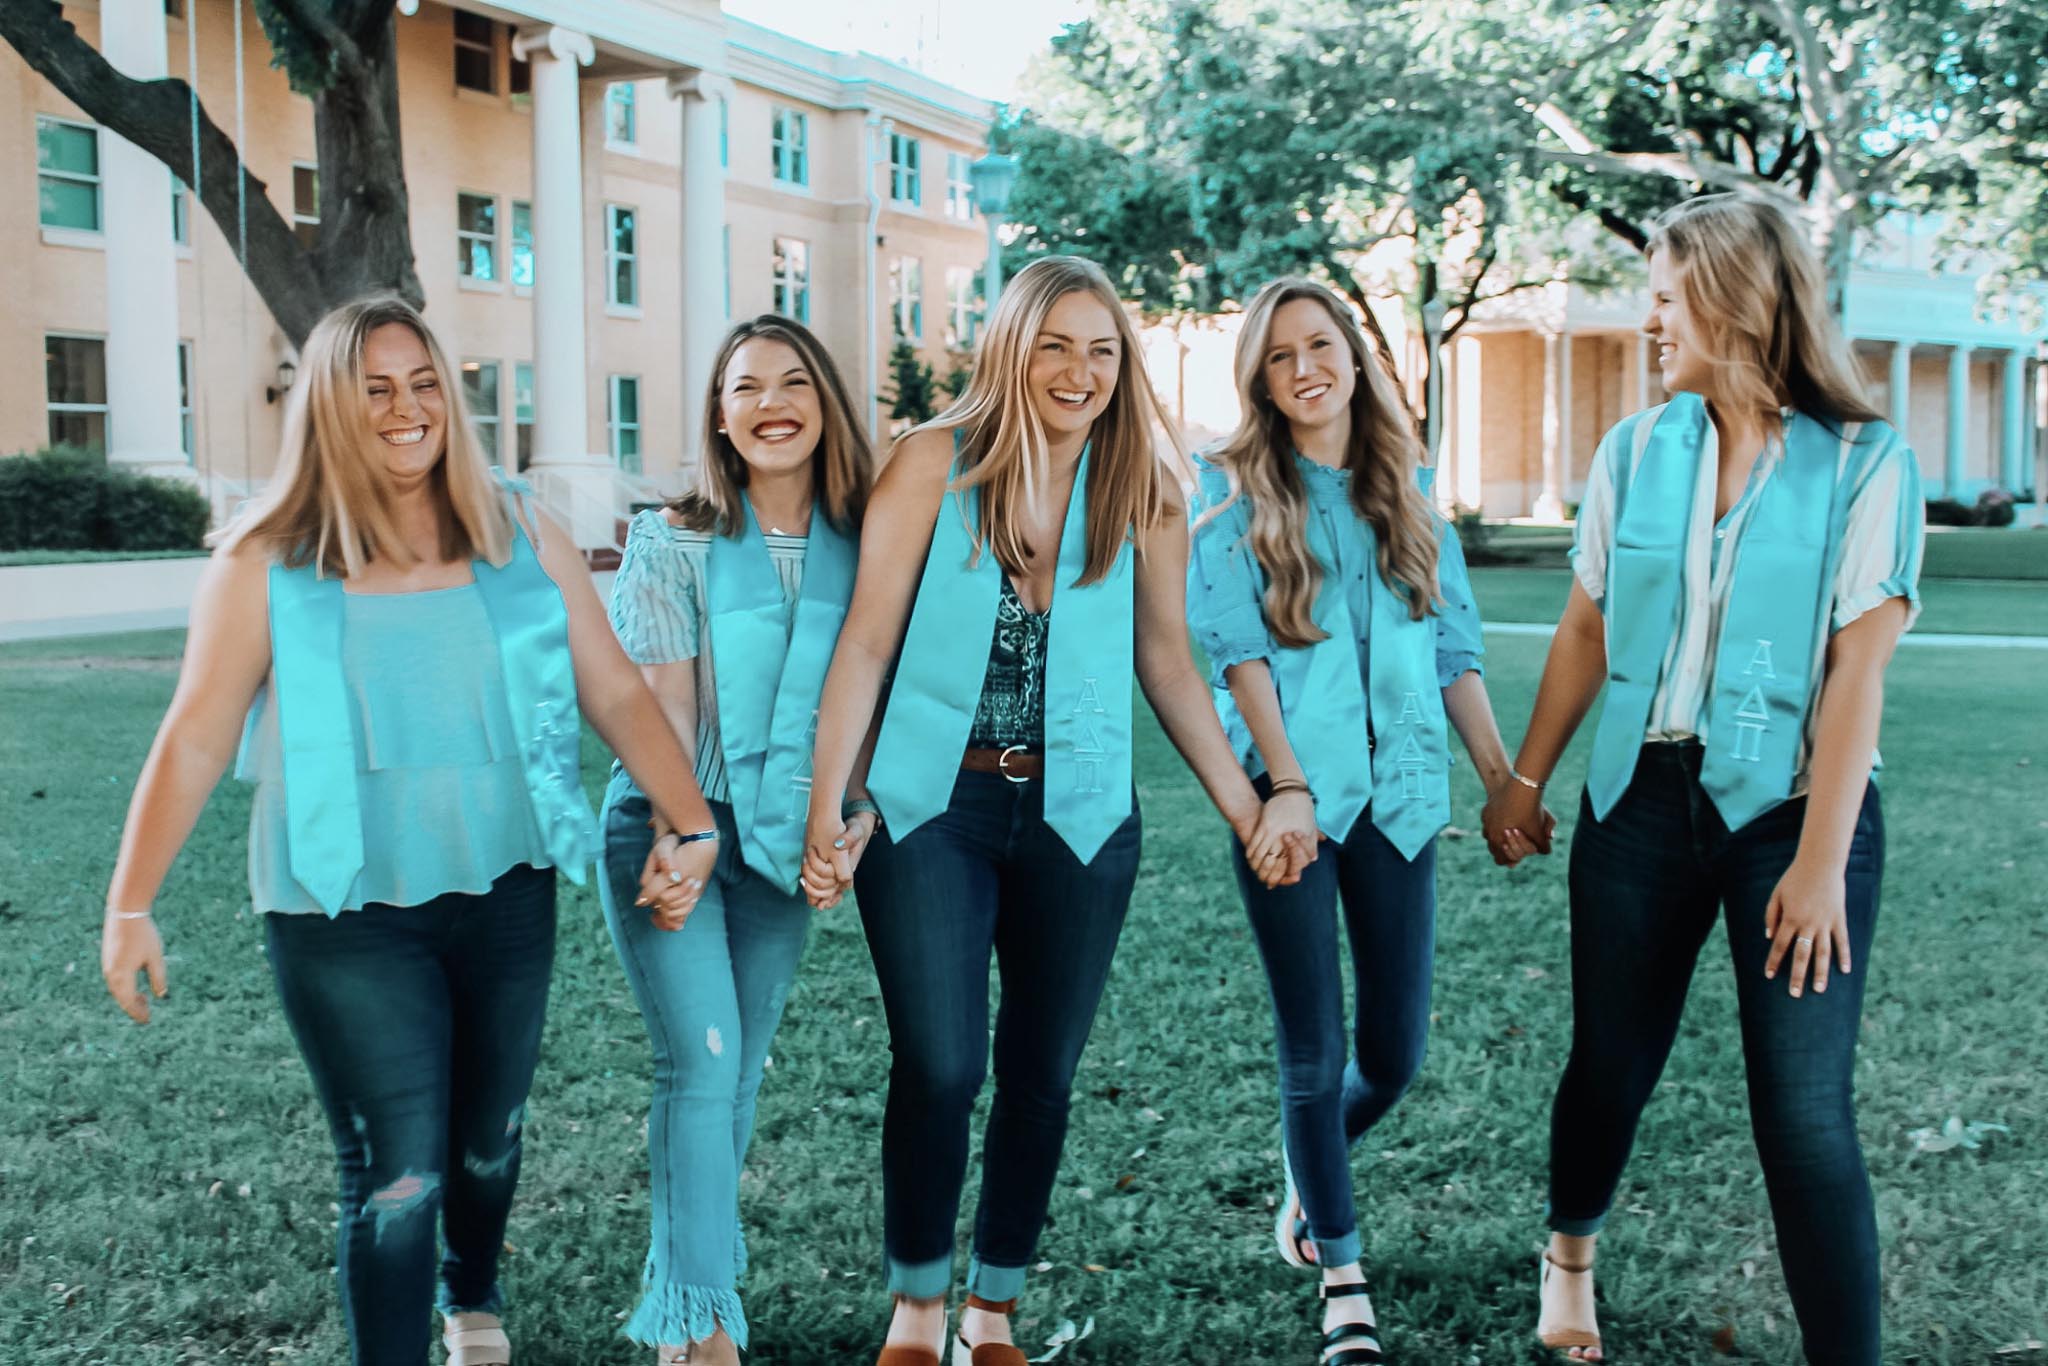 Sorority sisters walking together on campus with turquoise tinted clothing and background